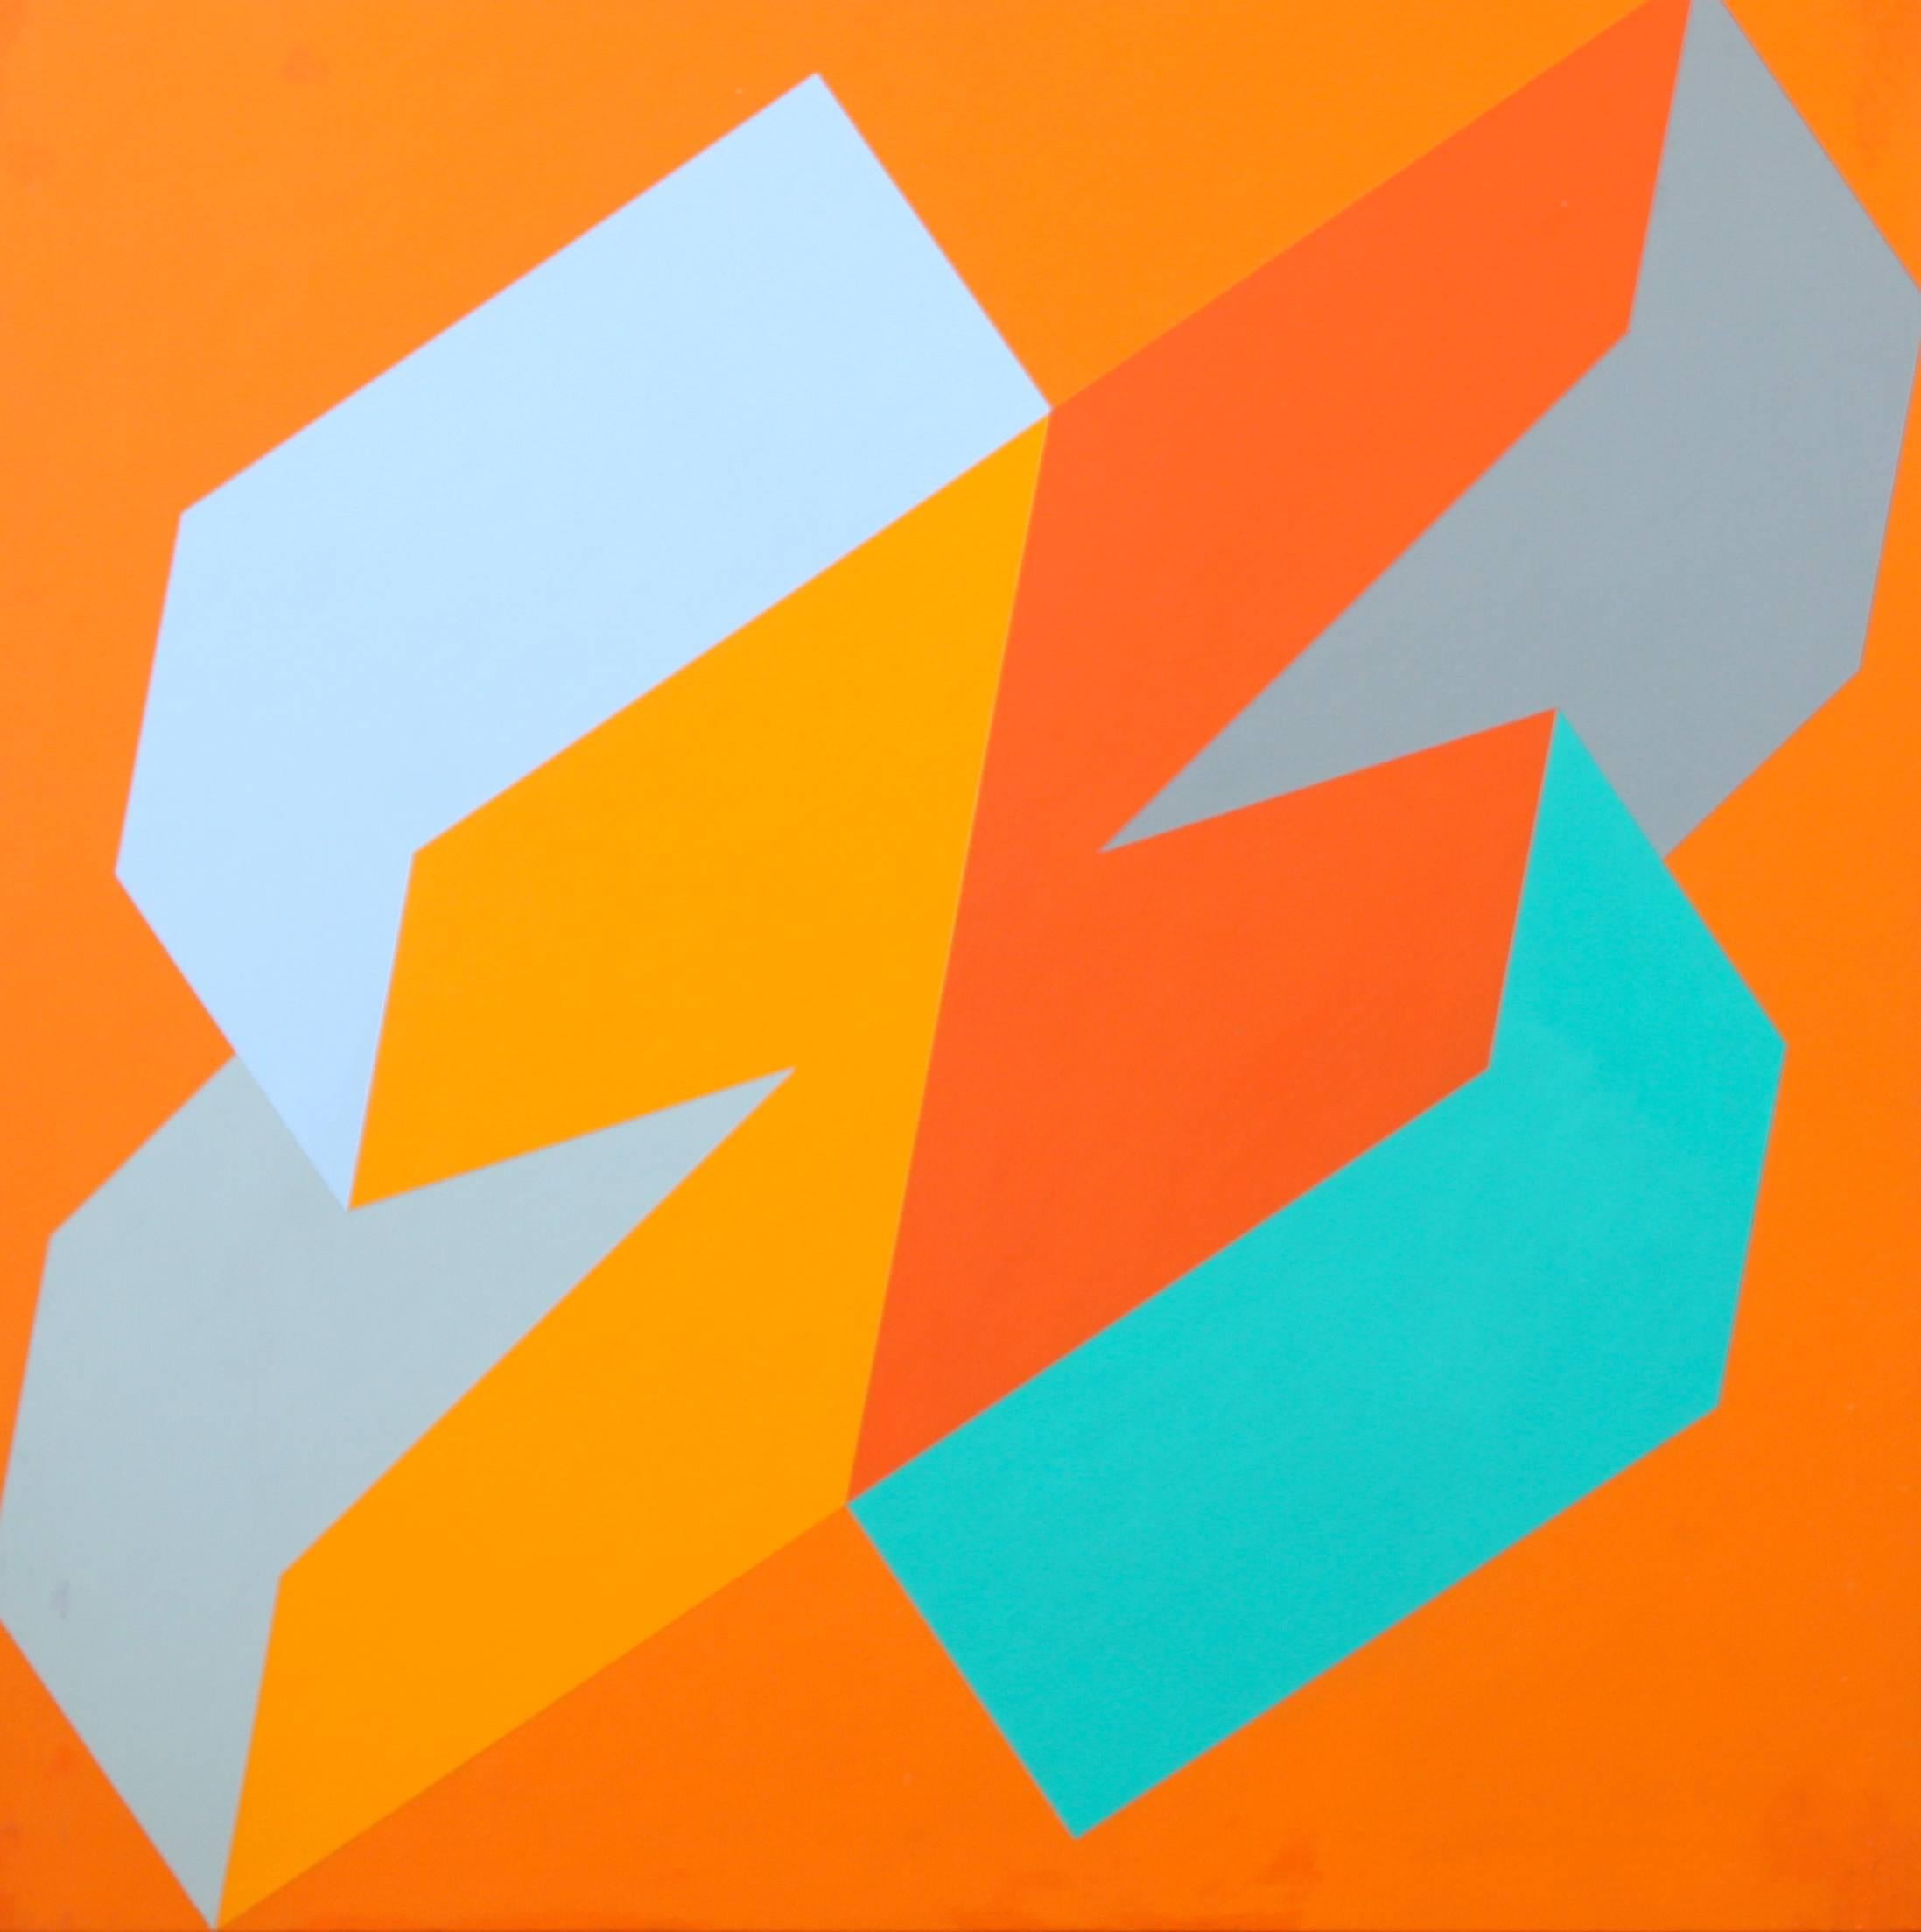 Blue Field, Orange Field, Gray Field  -  triptych painting series  - Abstract Geometric Painting by Richard Dahn